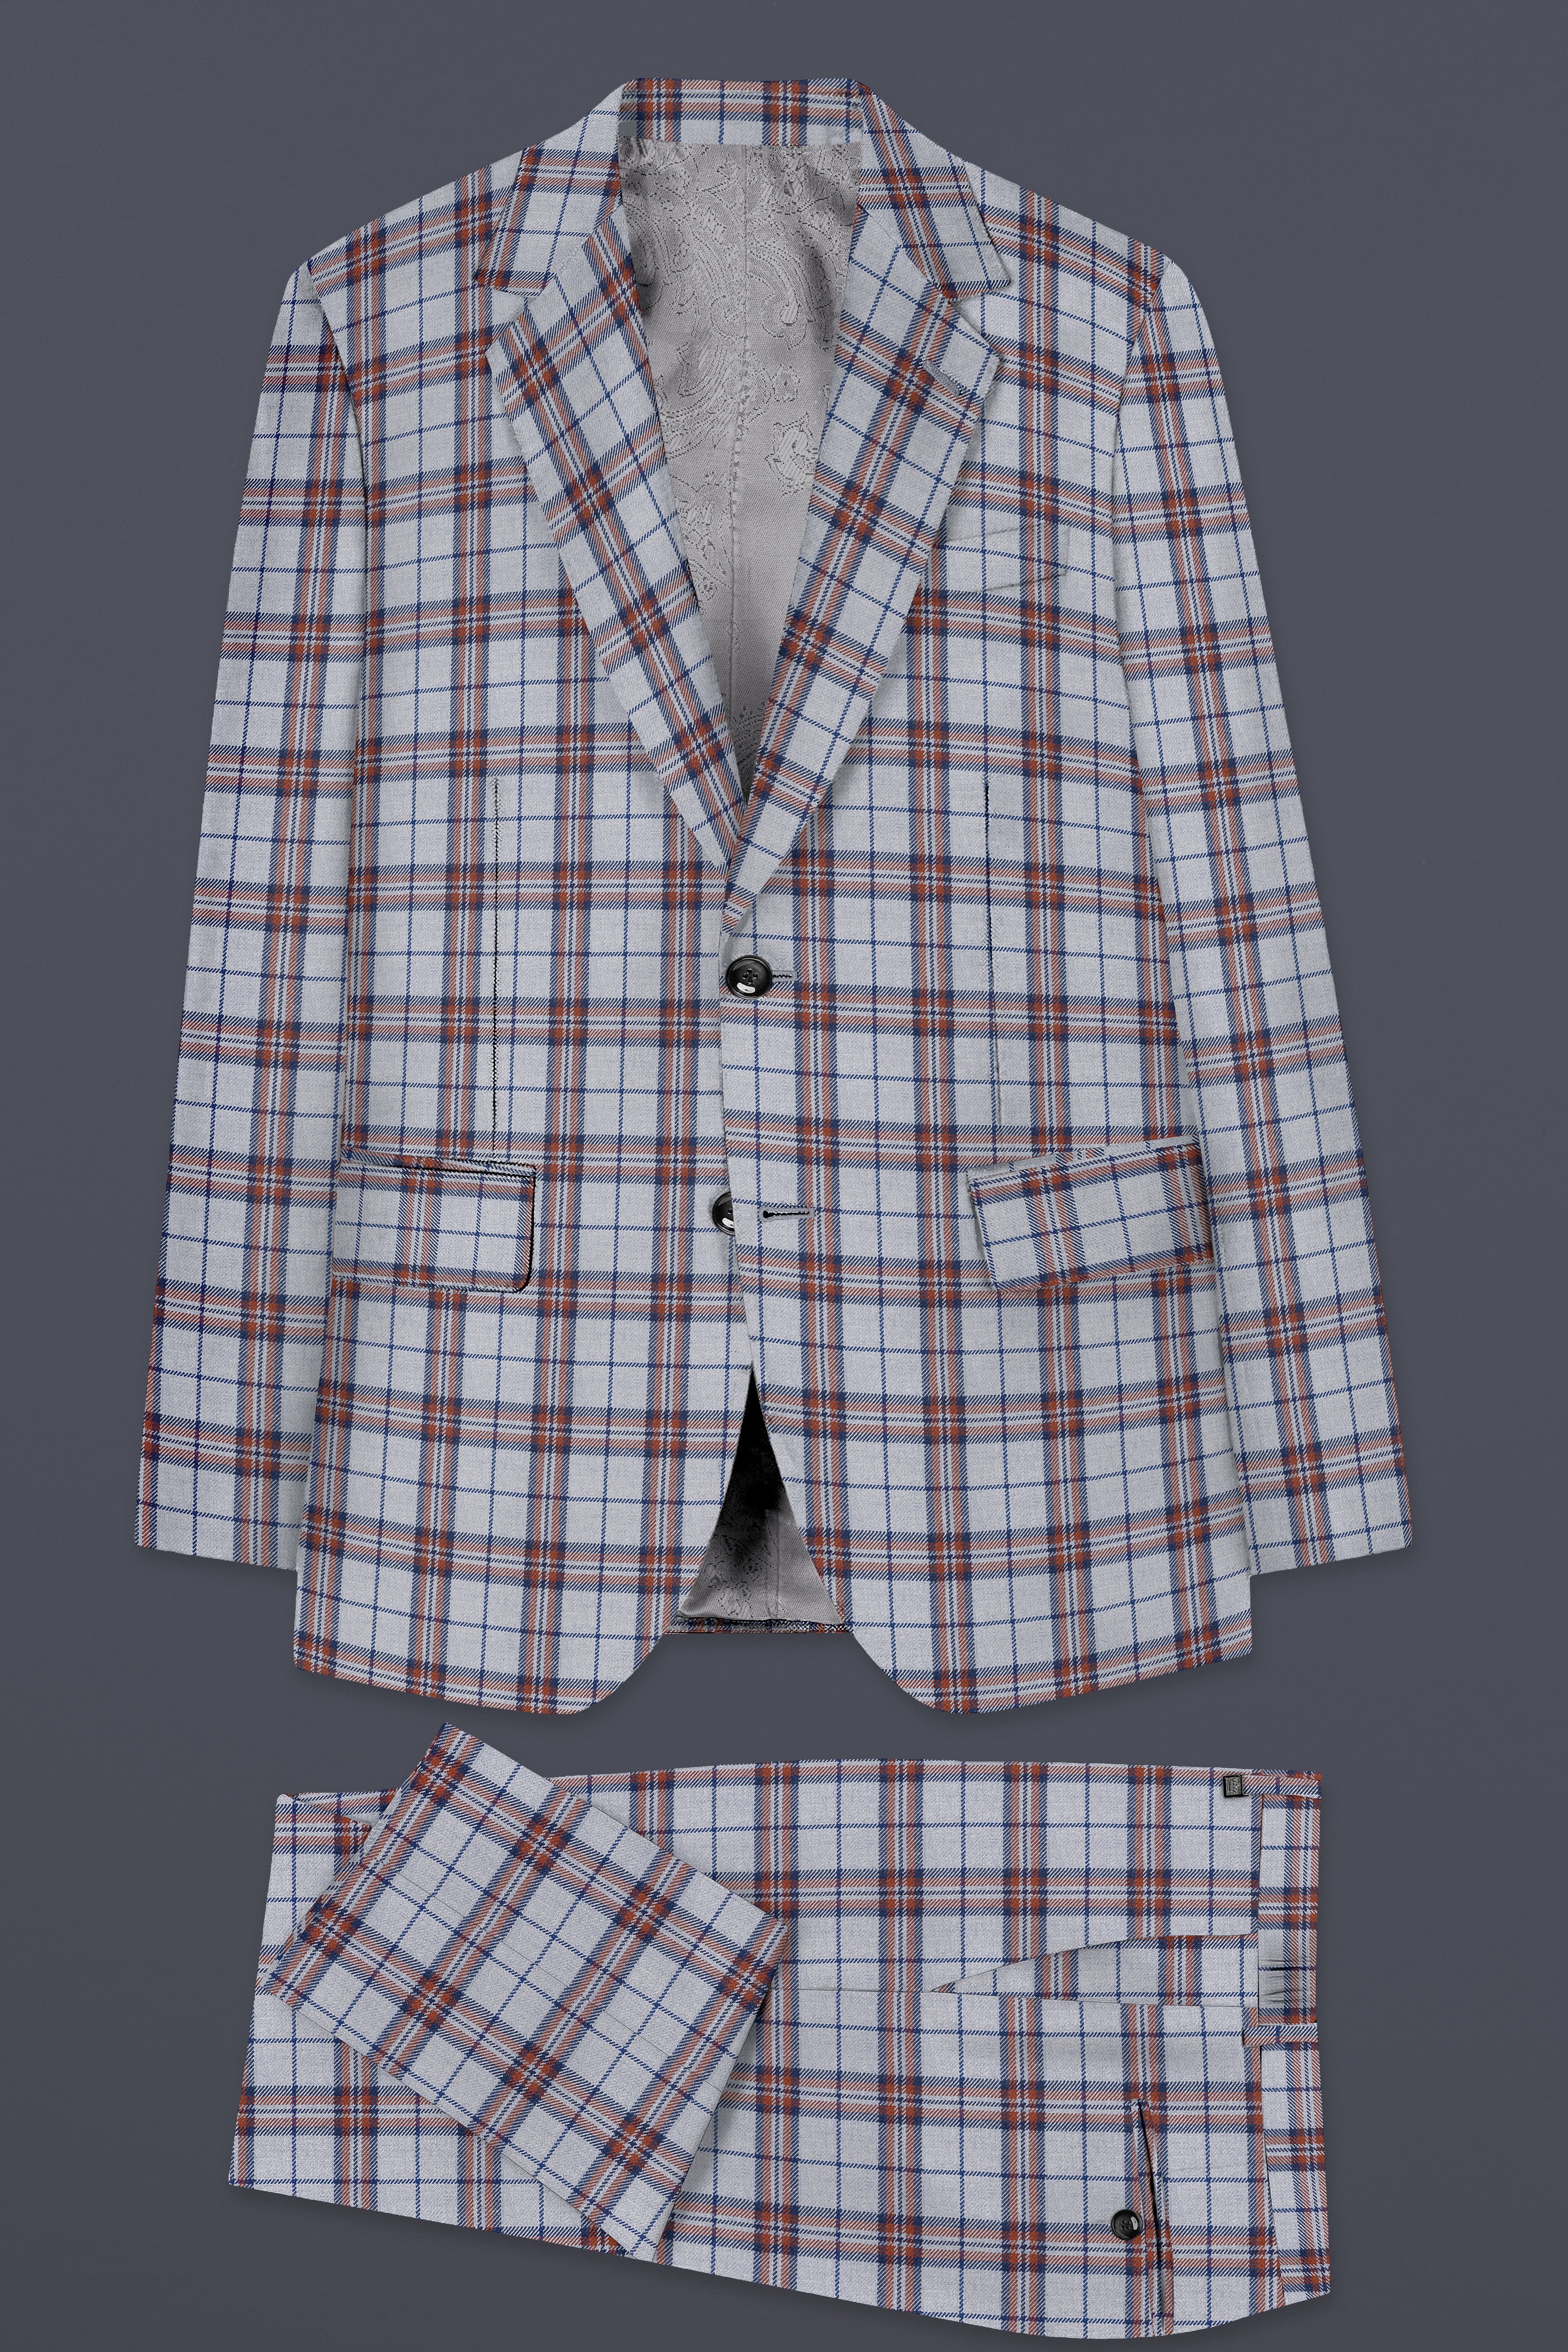 Cadet Grey with Maroon and Blue Plaid Tweed Suit